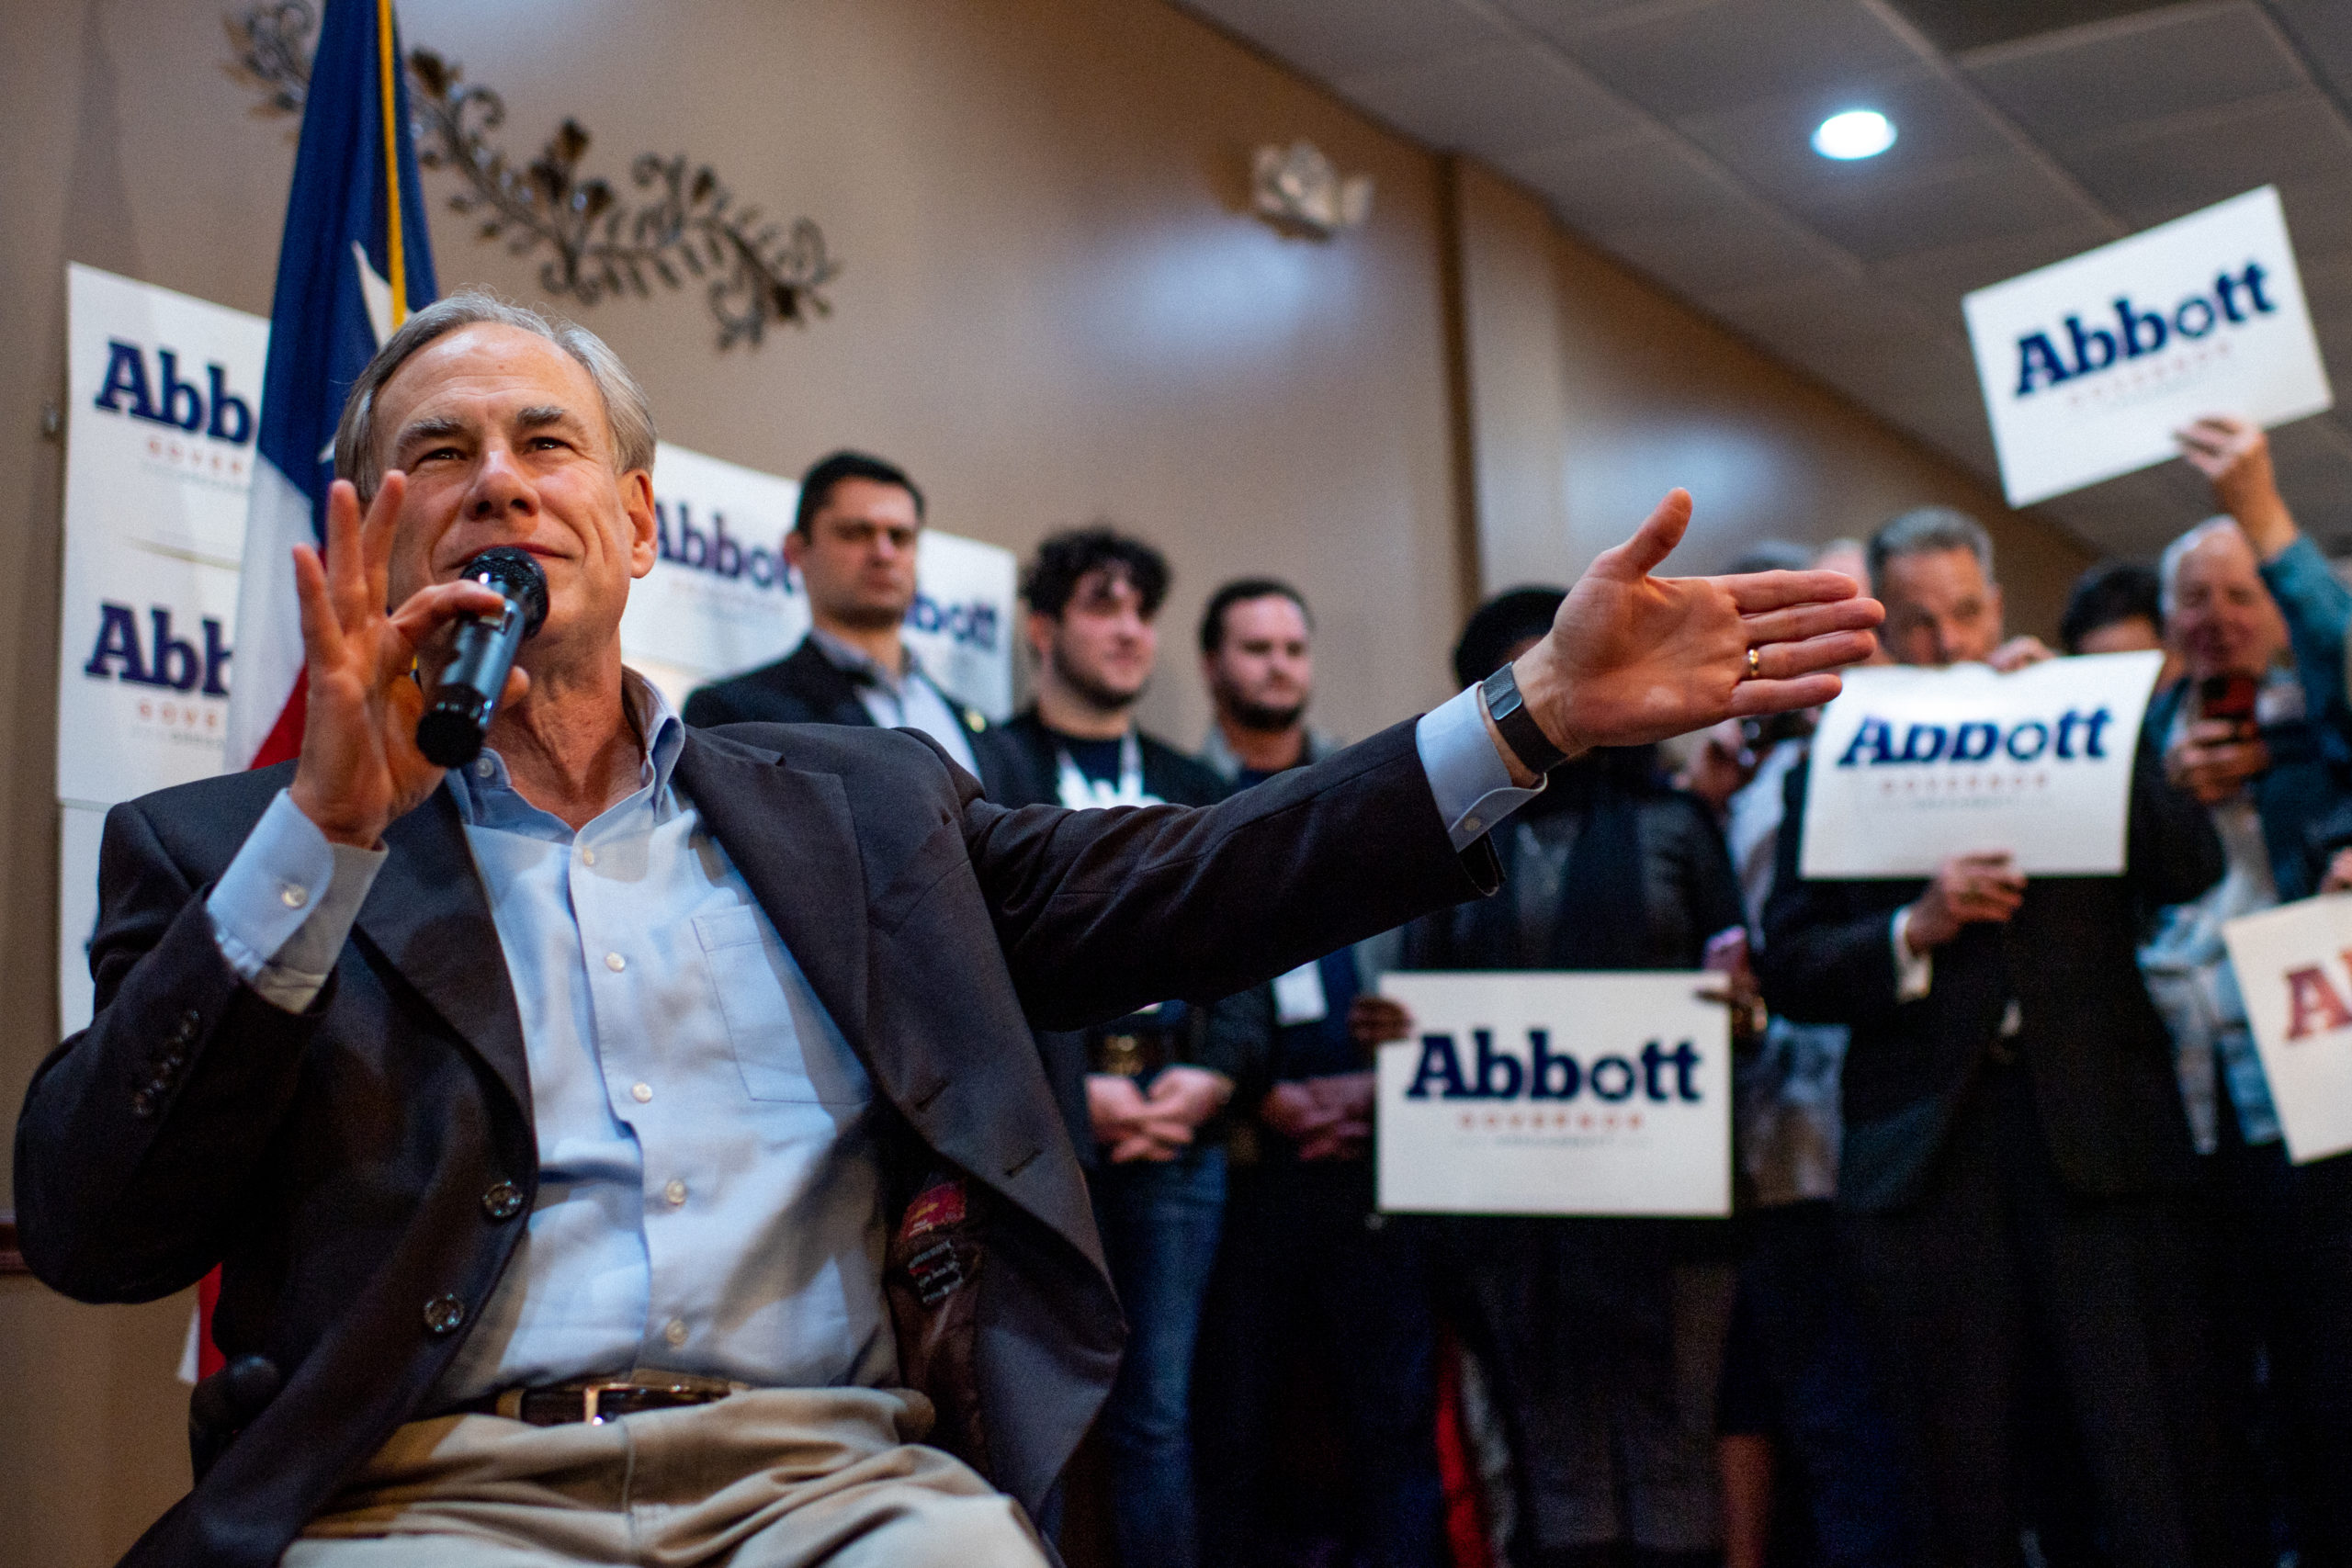 Texas Gov. Greg Abbott speaks during the 'Get Out The Vote' campaign event on February 23, 2022 in Houston, Texas. (Photo by Brandon Bell/Getty Images)